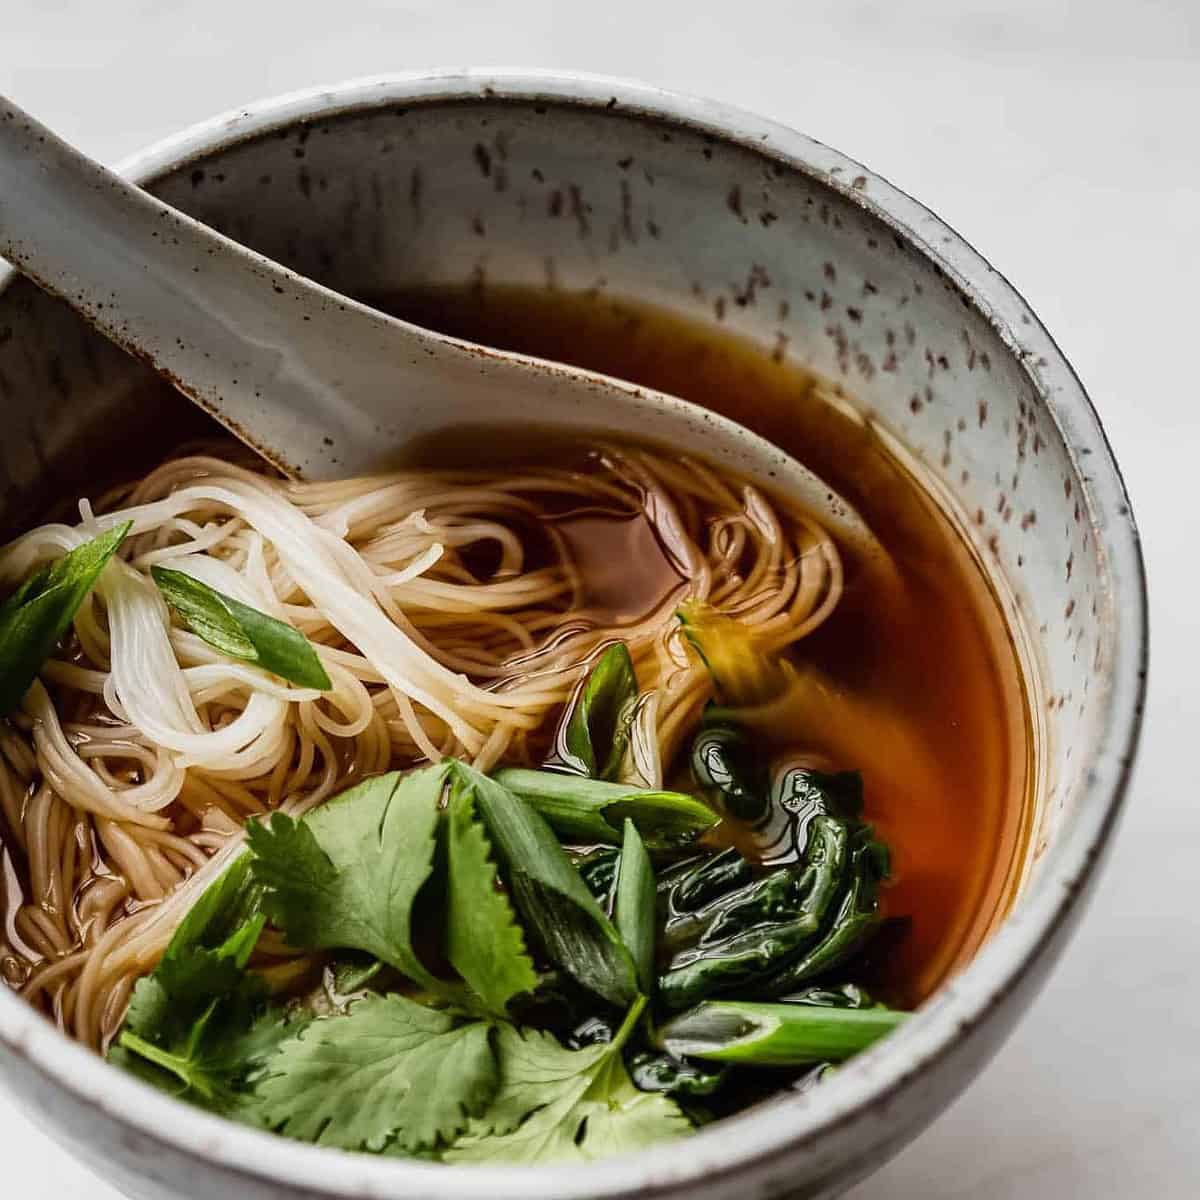  Get ready to slurp up every drop of this savory broth.